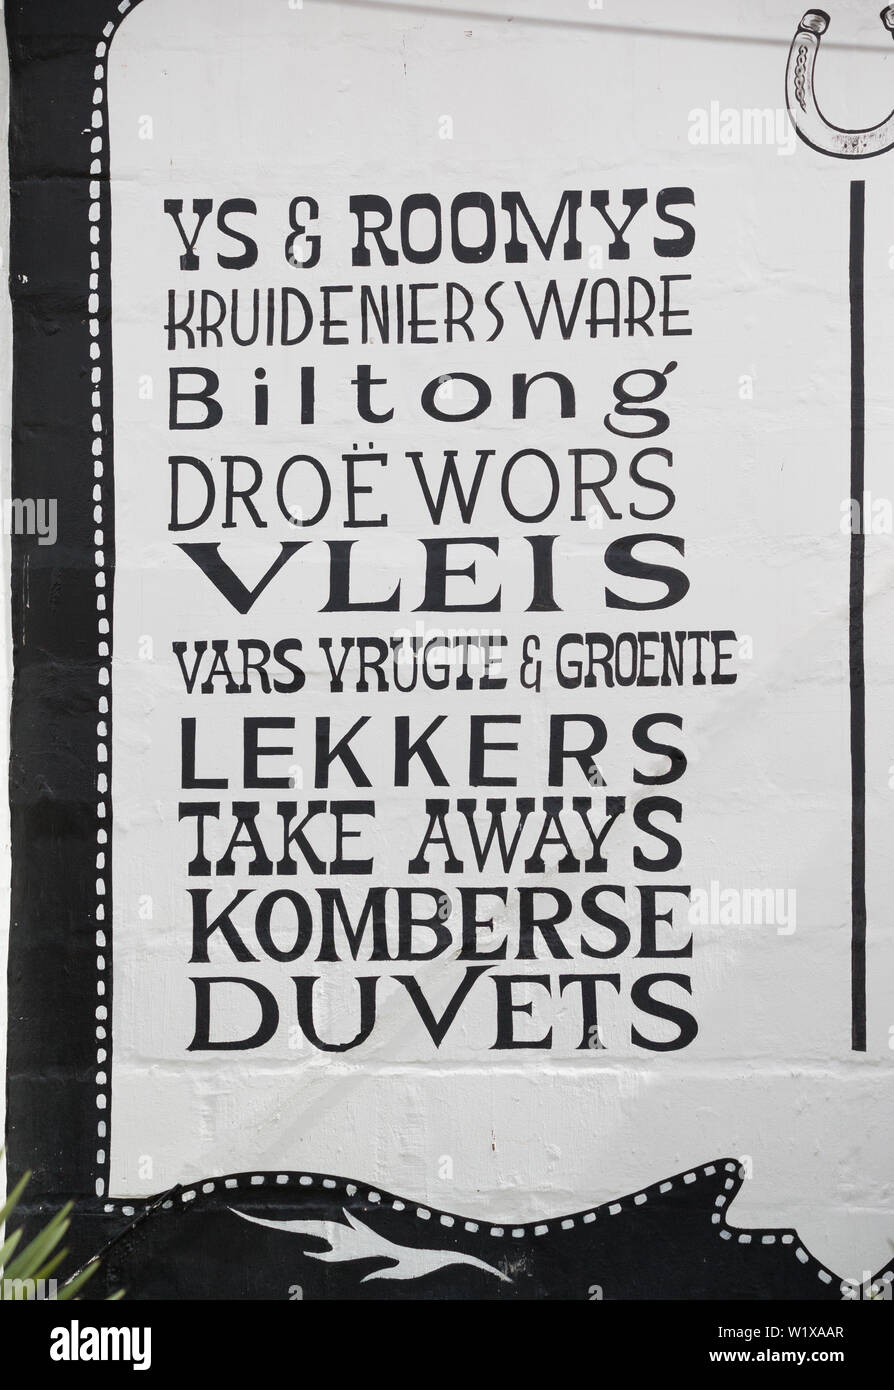 Afrikaans language words and text in a long list in black paint on a white exterior wall of a shop selling various items in South Africa Stock Photo